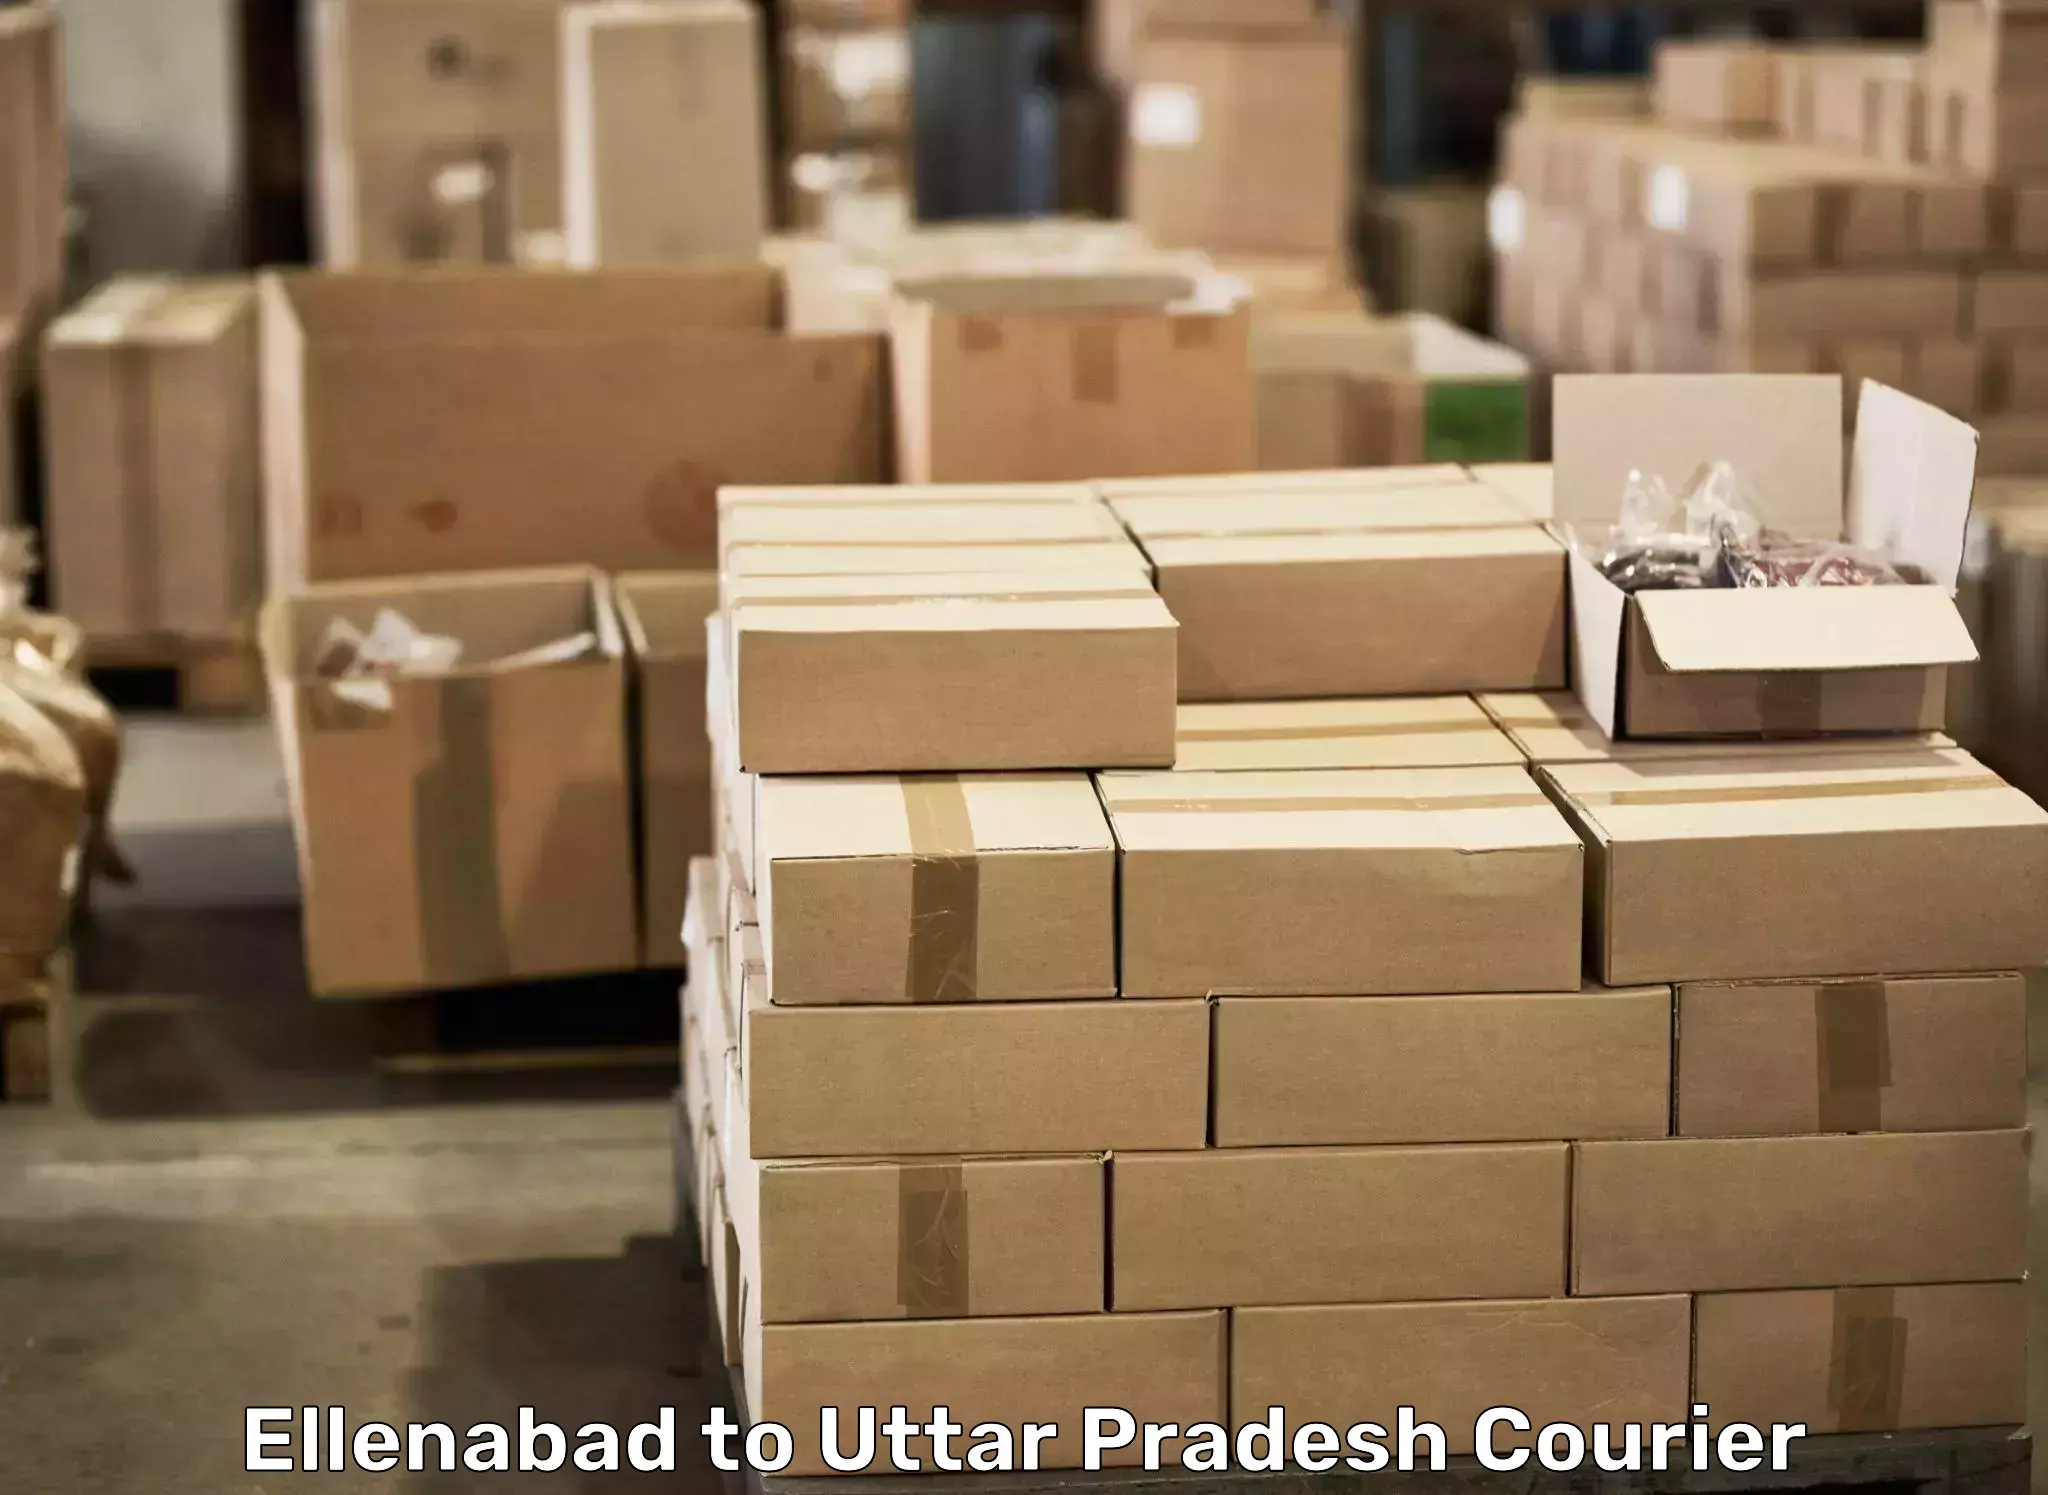 Stress-free furniture moving in Ellenabad to Chandauli